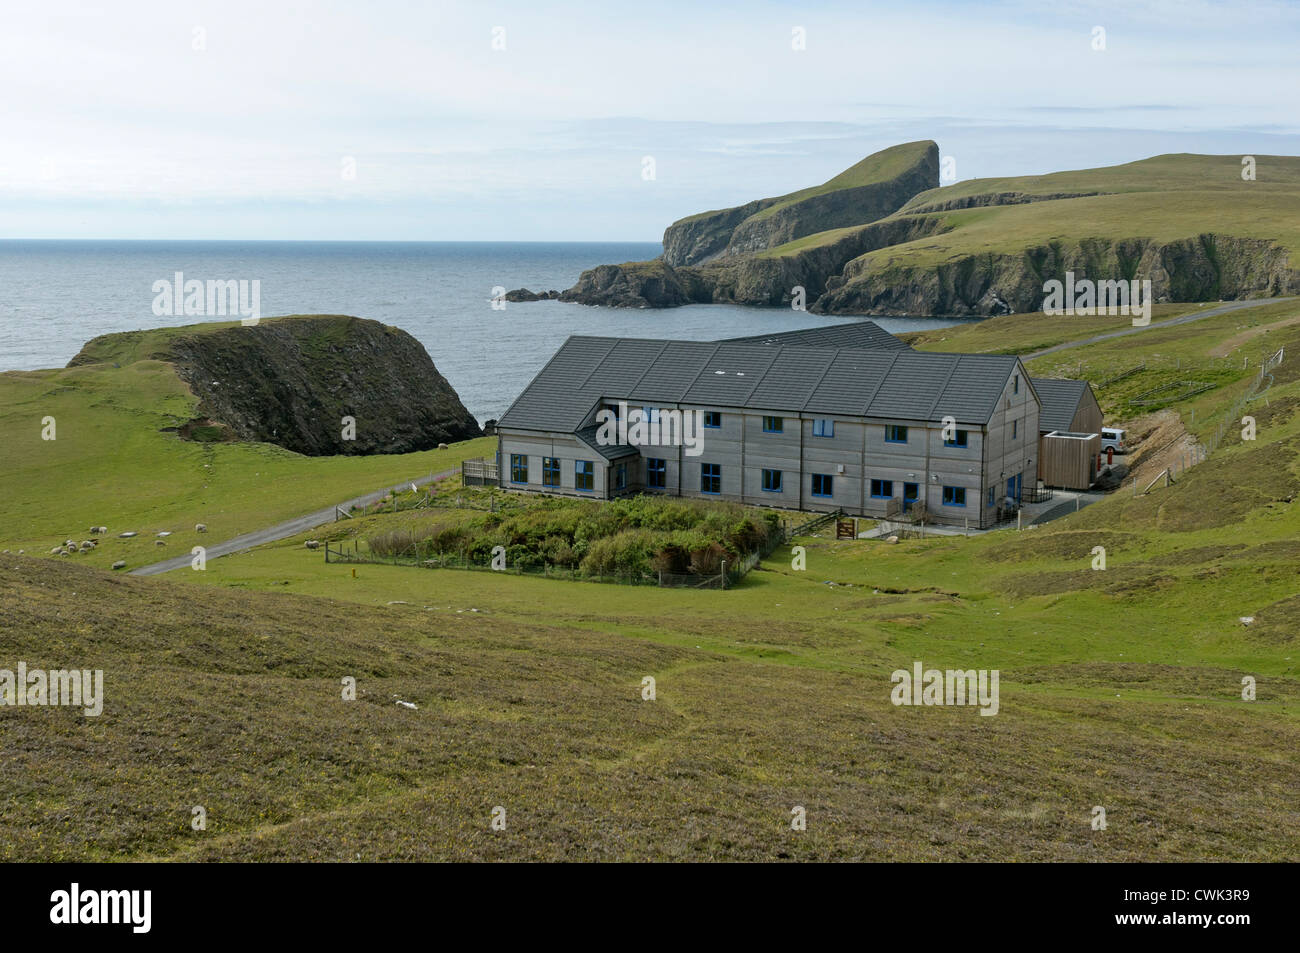 Fair Isle Bird Observatory in the Shetland Isles with Sheep Rock in background. June 2012. Stock Photo